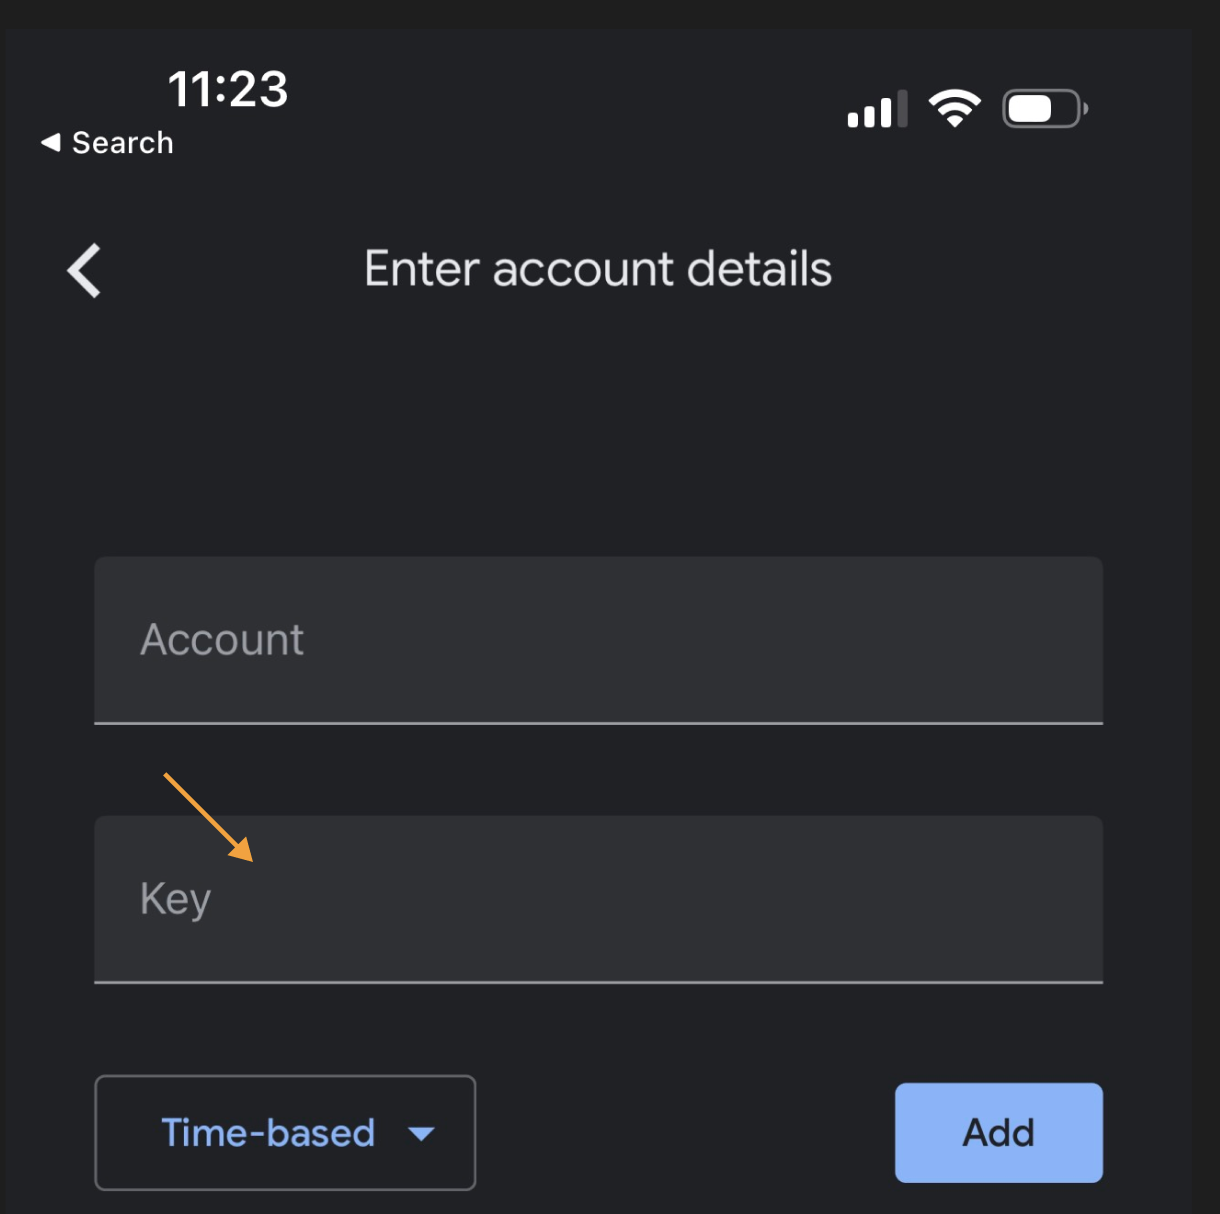 Google authenticator app Account and Key fields